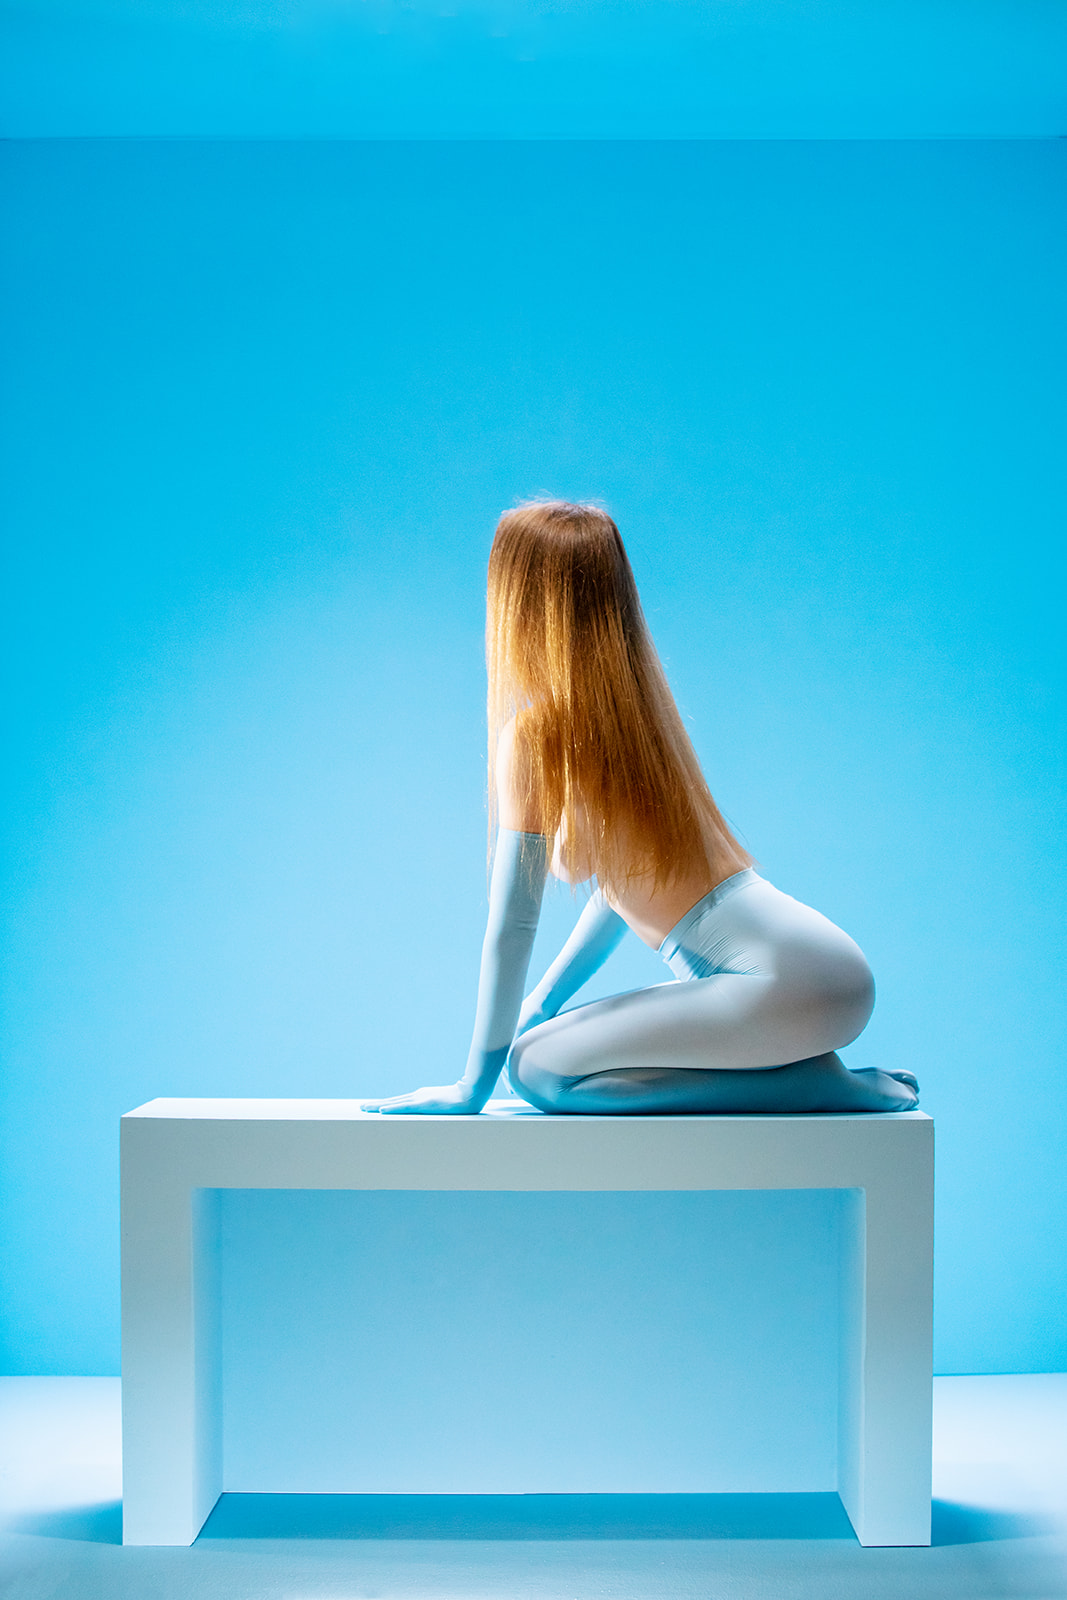 Blue Tights Sculpture in a Blue Cube Editorial Photo Shoot - Image Property of www.j-dphoto.com